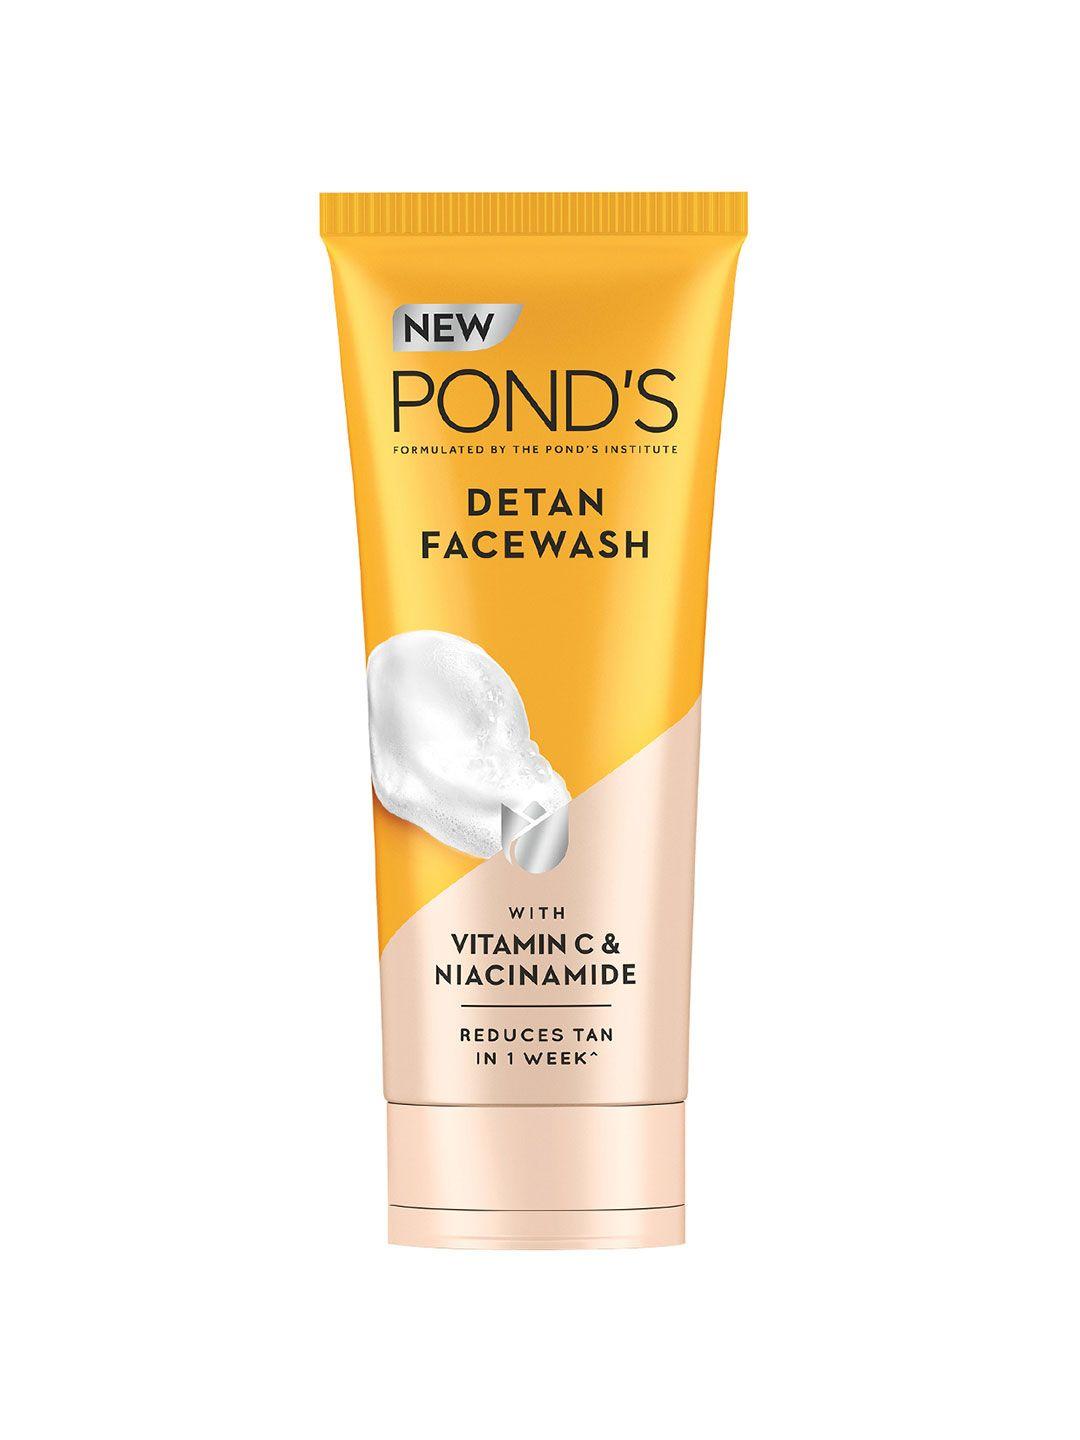 Ponds Detan Face Wash with Vitamin C & Niacinamide for Tan Reduction - 100g